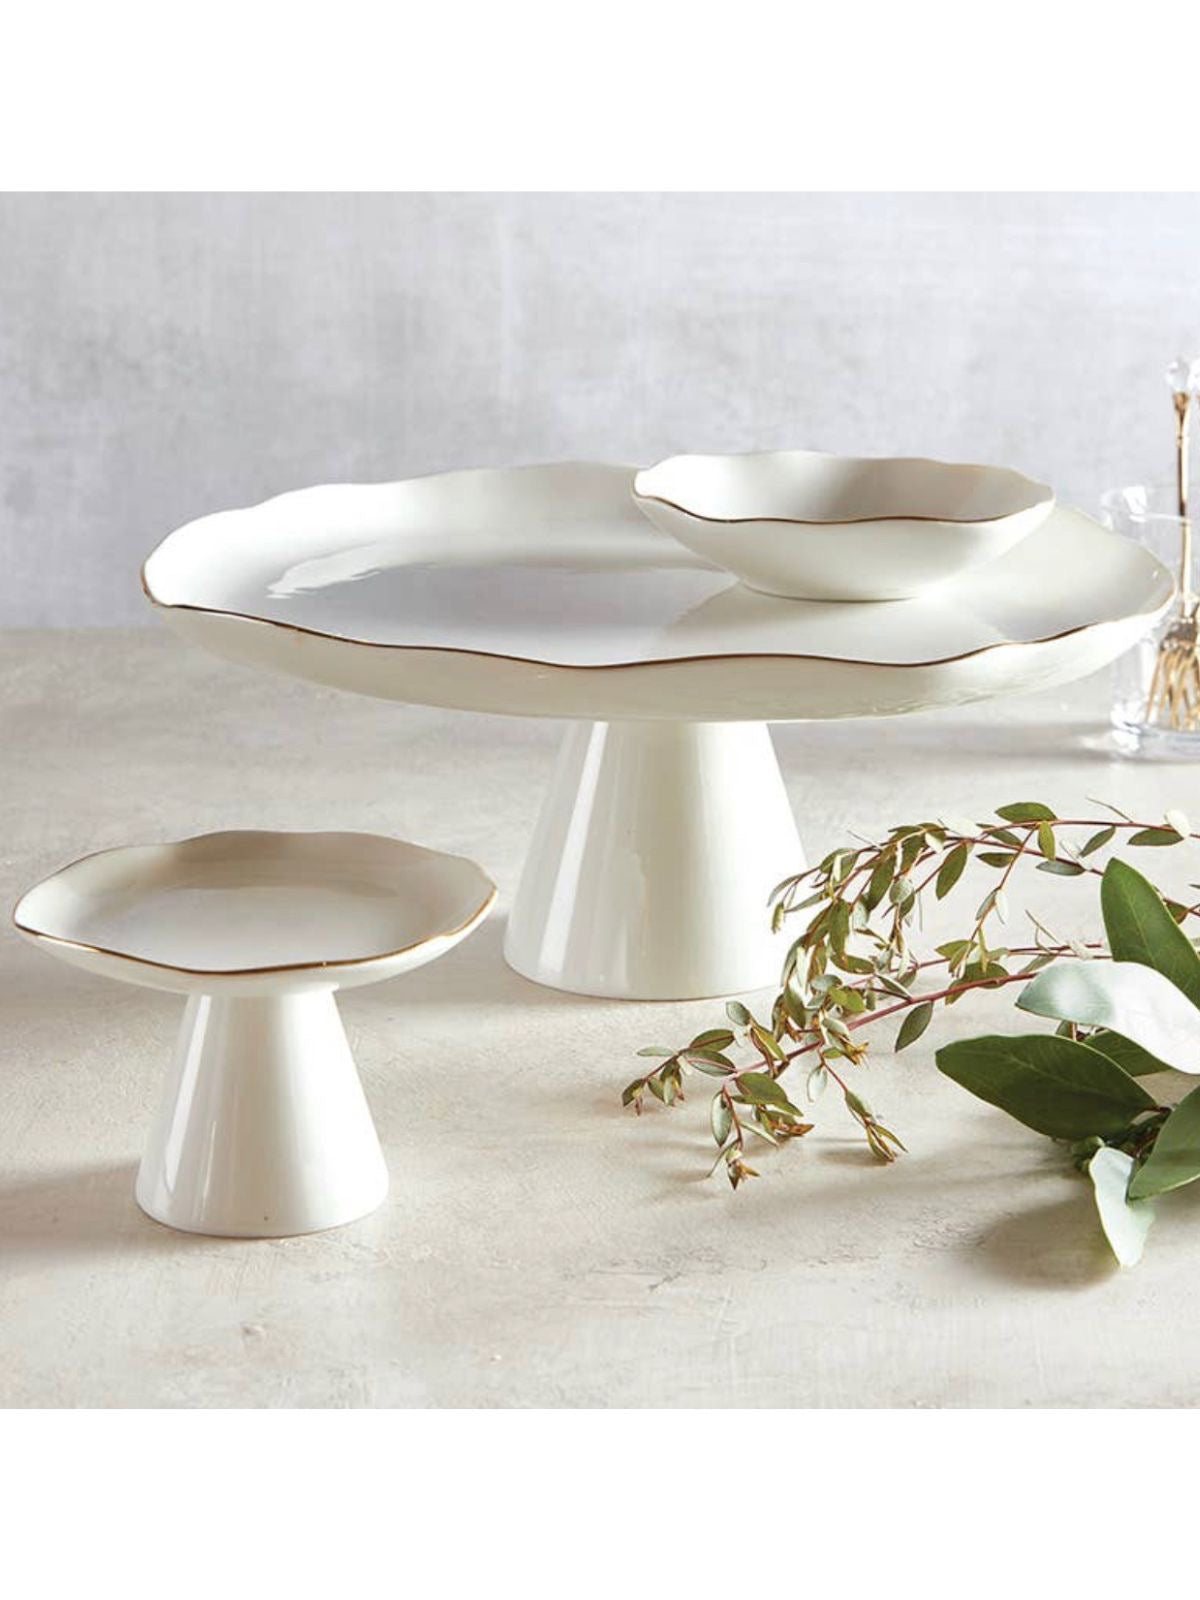 This 11.5 D Pedestal Tray Features white ceramic and gold edges to provide a modern minimalist design.